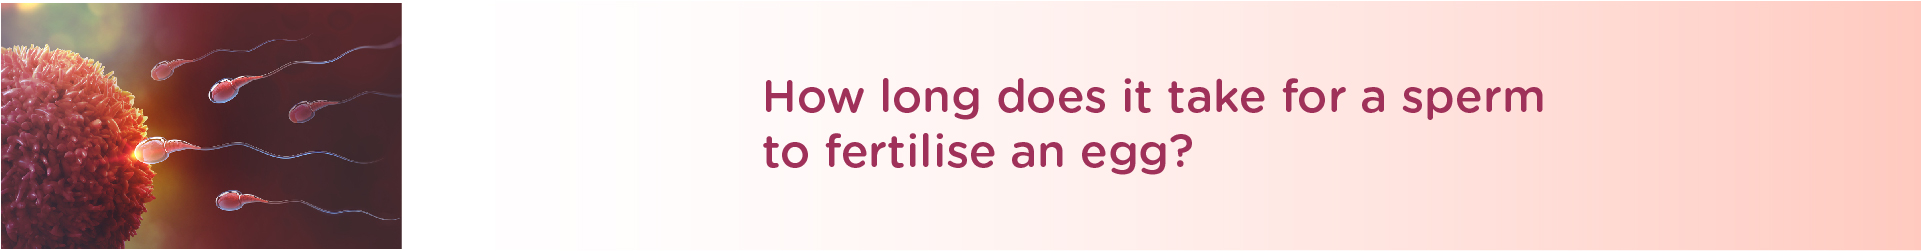 How Long Does It Take for a Sperm to Fertilize an Egg?